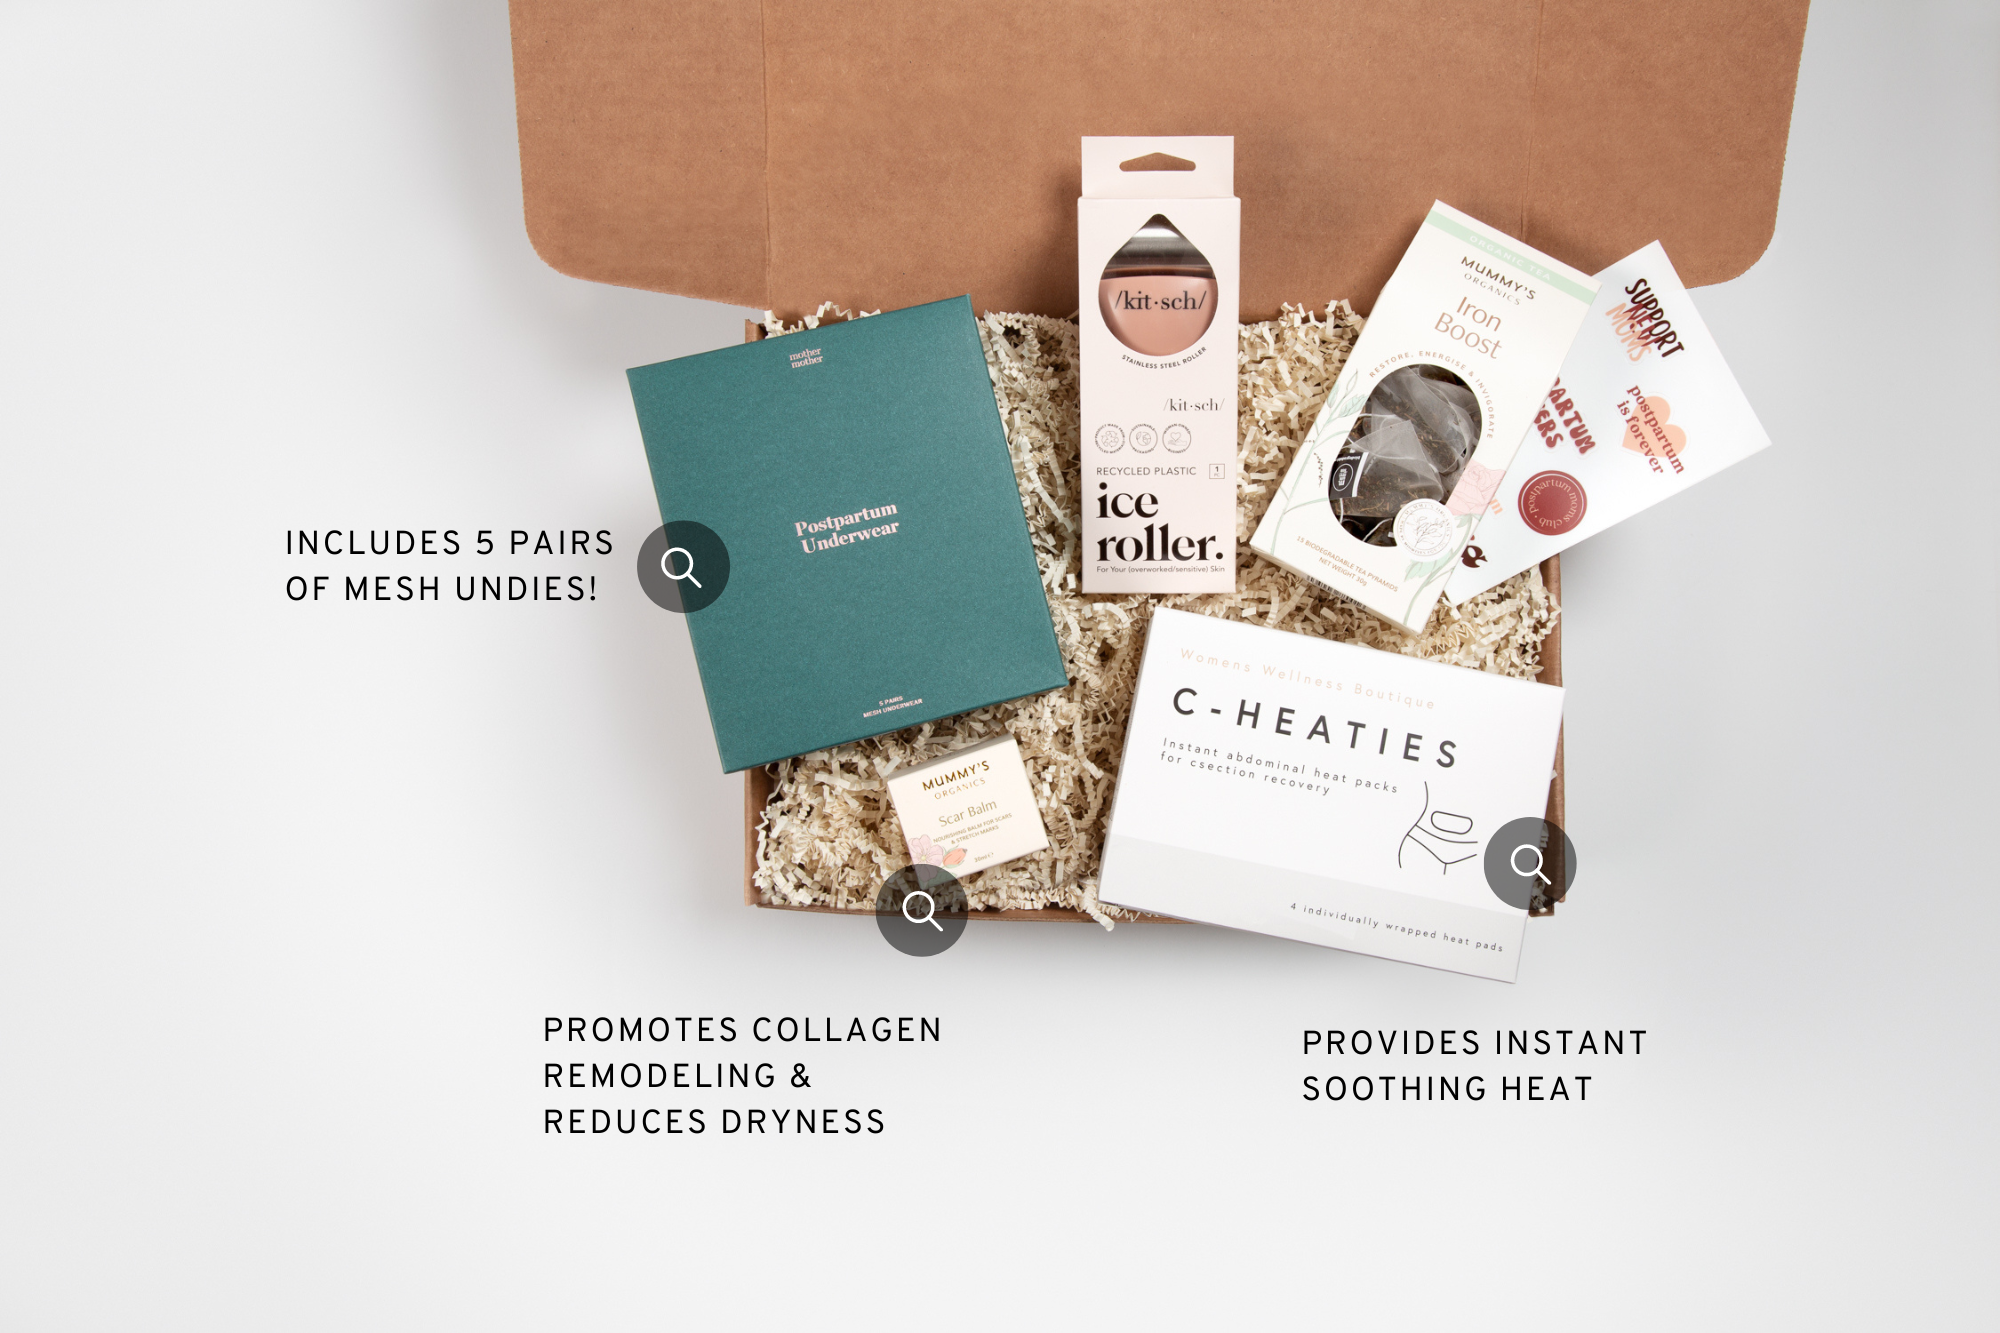 C-Section Recovery Gift Box – Hello Postpartum